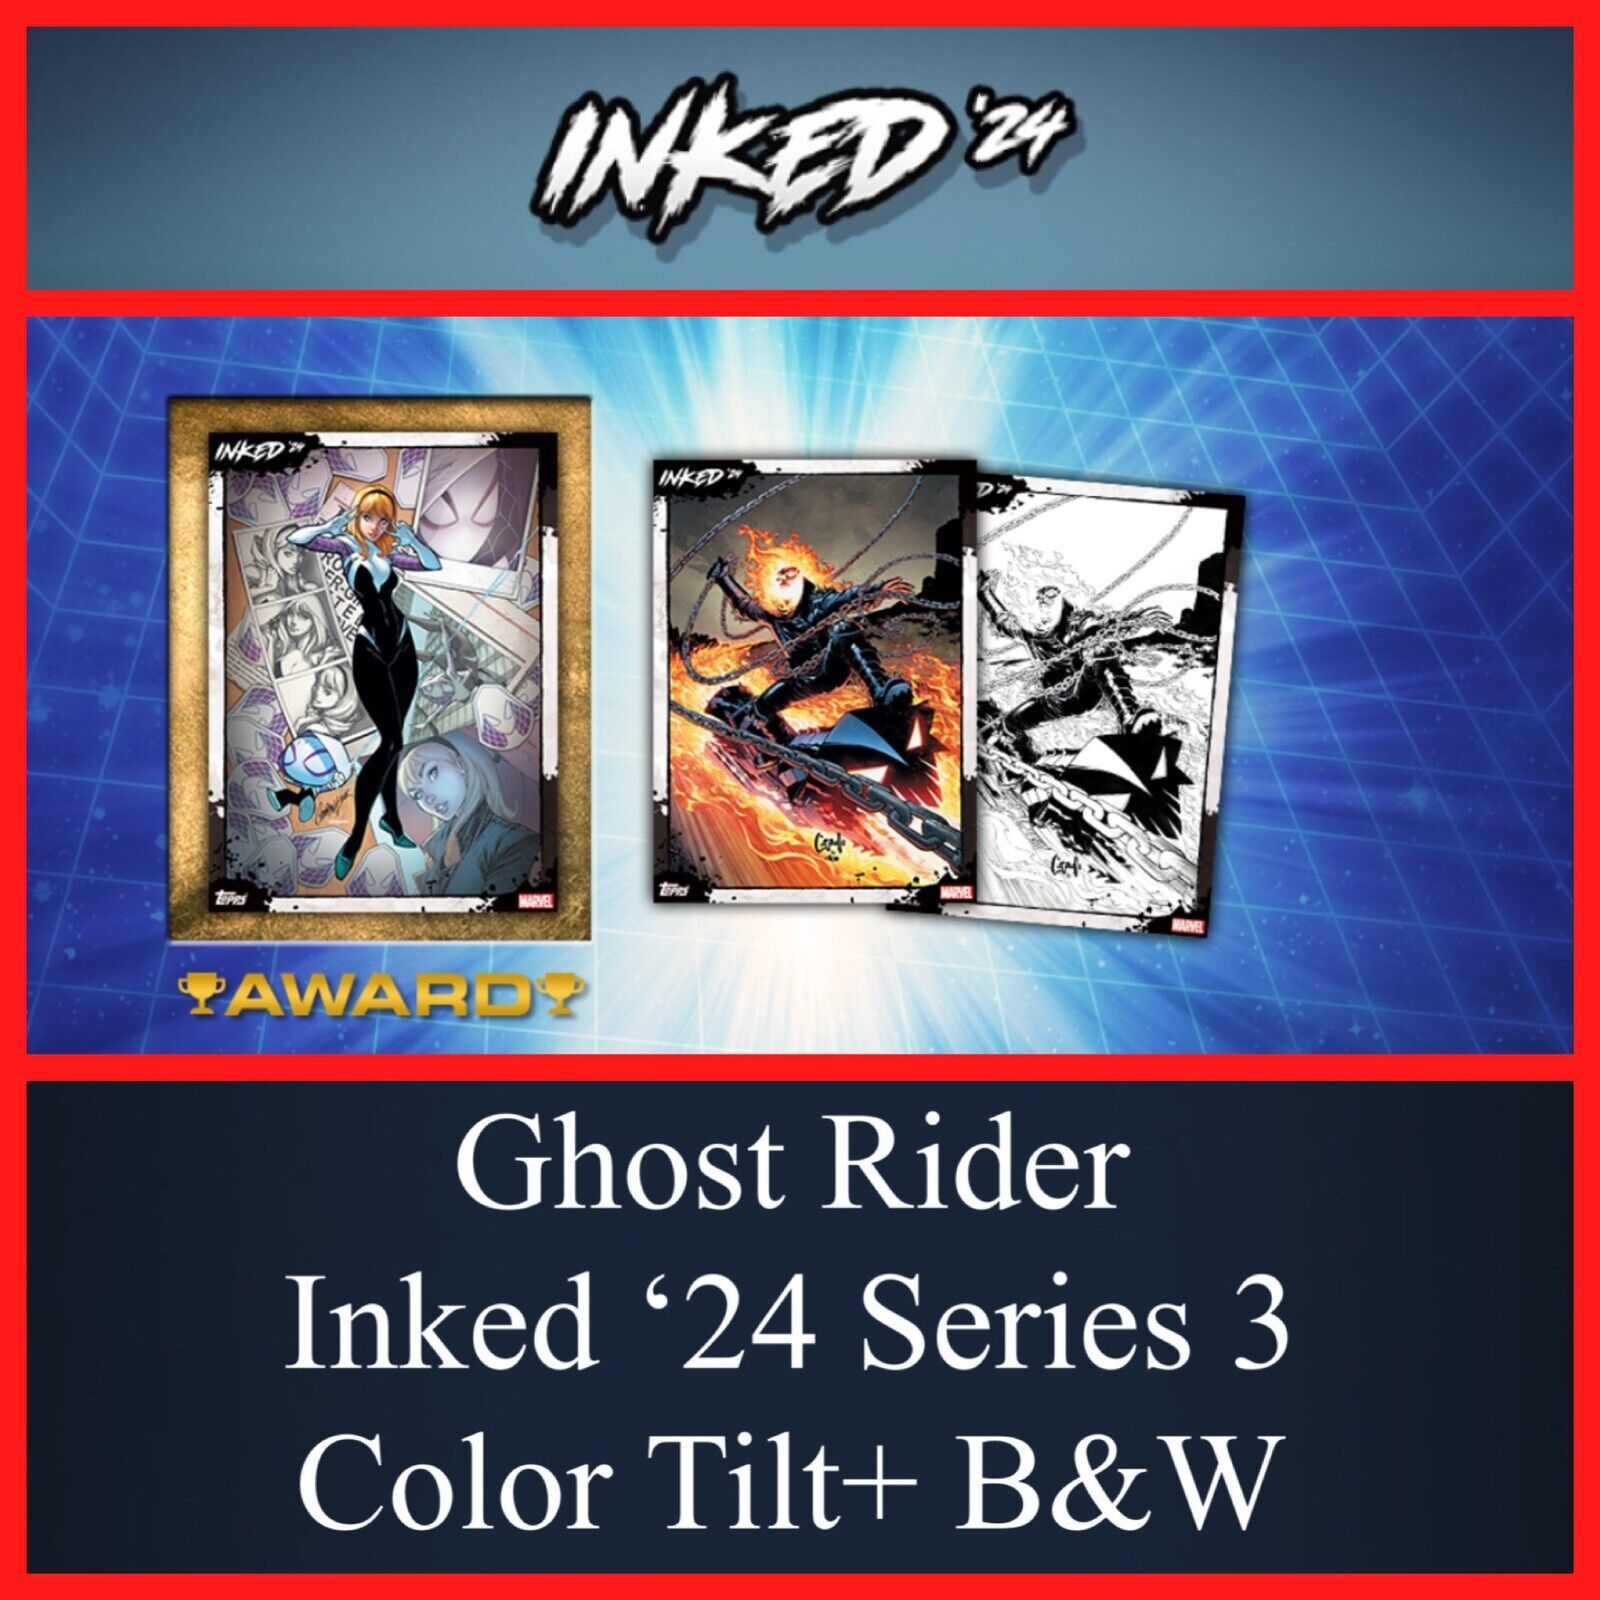 GHOST RIDER INKED ‘24 SERIES 3 COLOR TILT+B&W-TOPPS MARVEL COLLECT DIGITAL